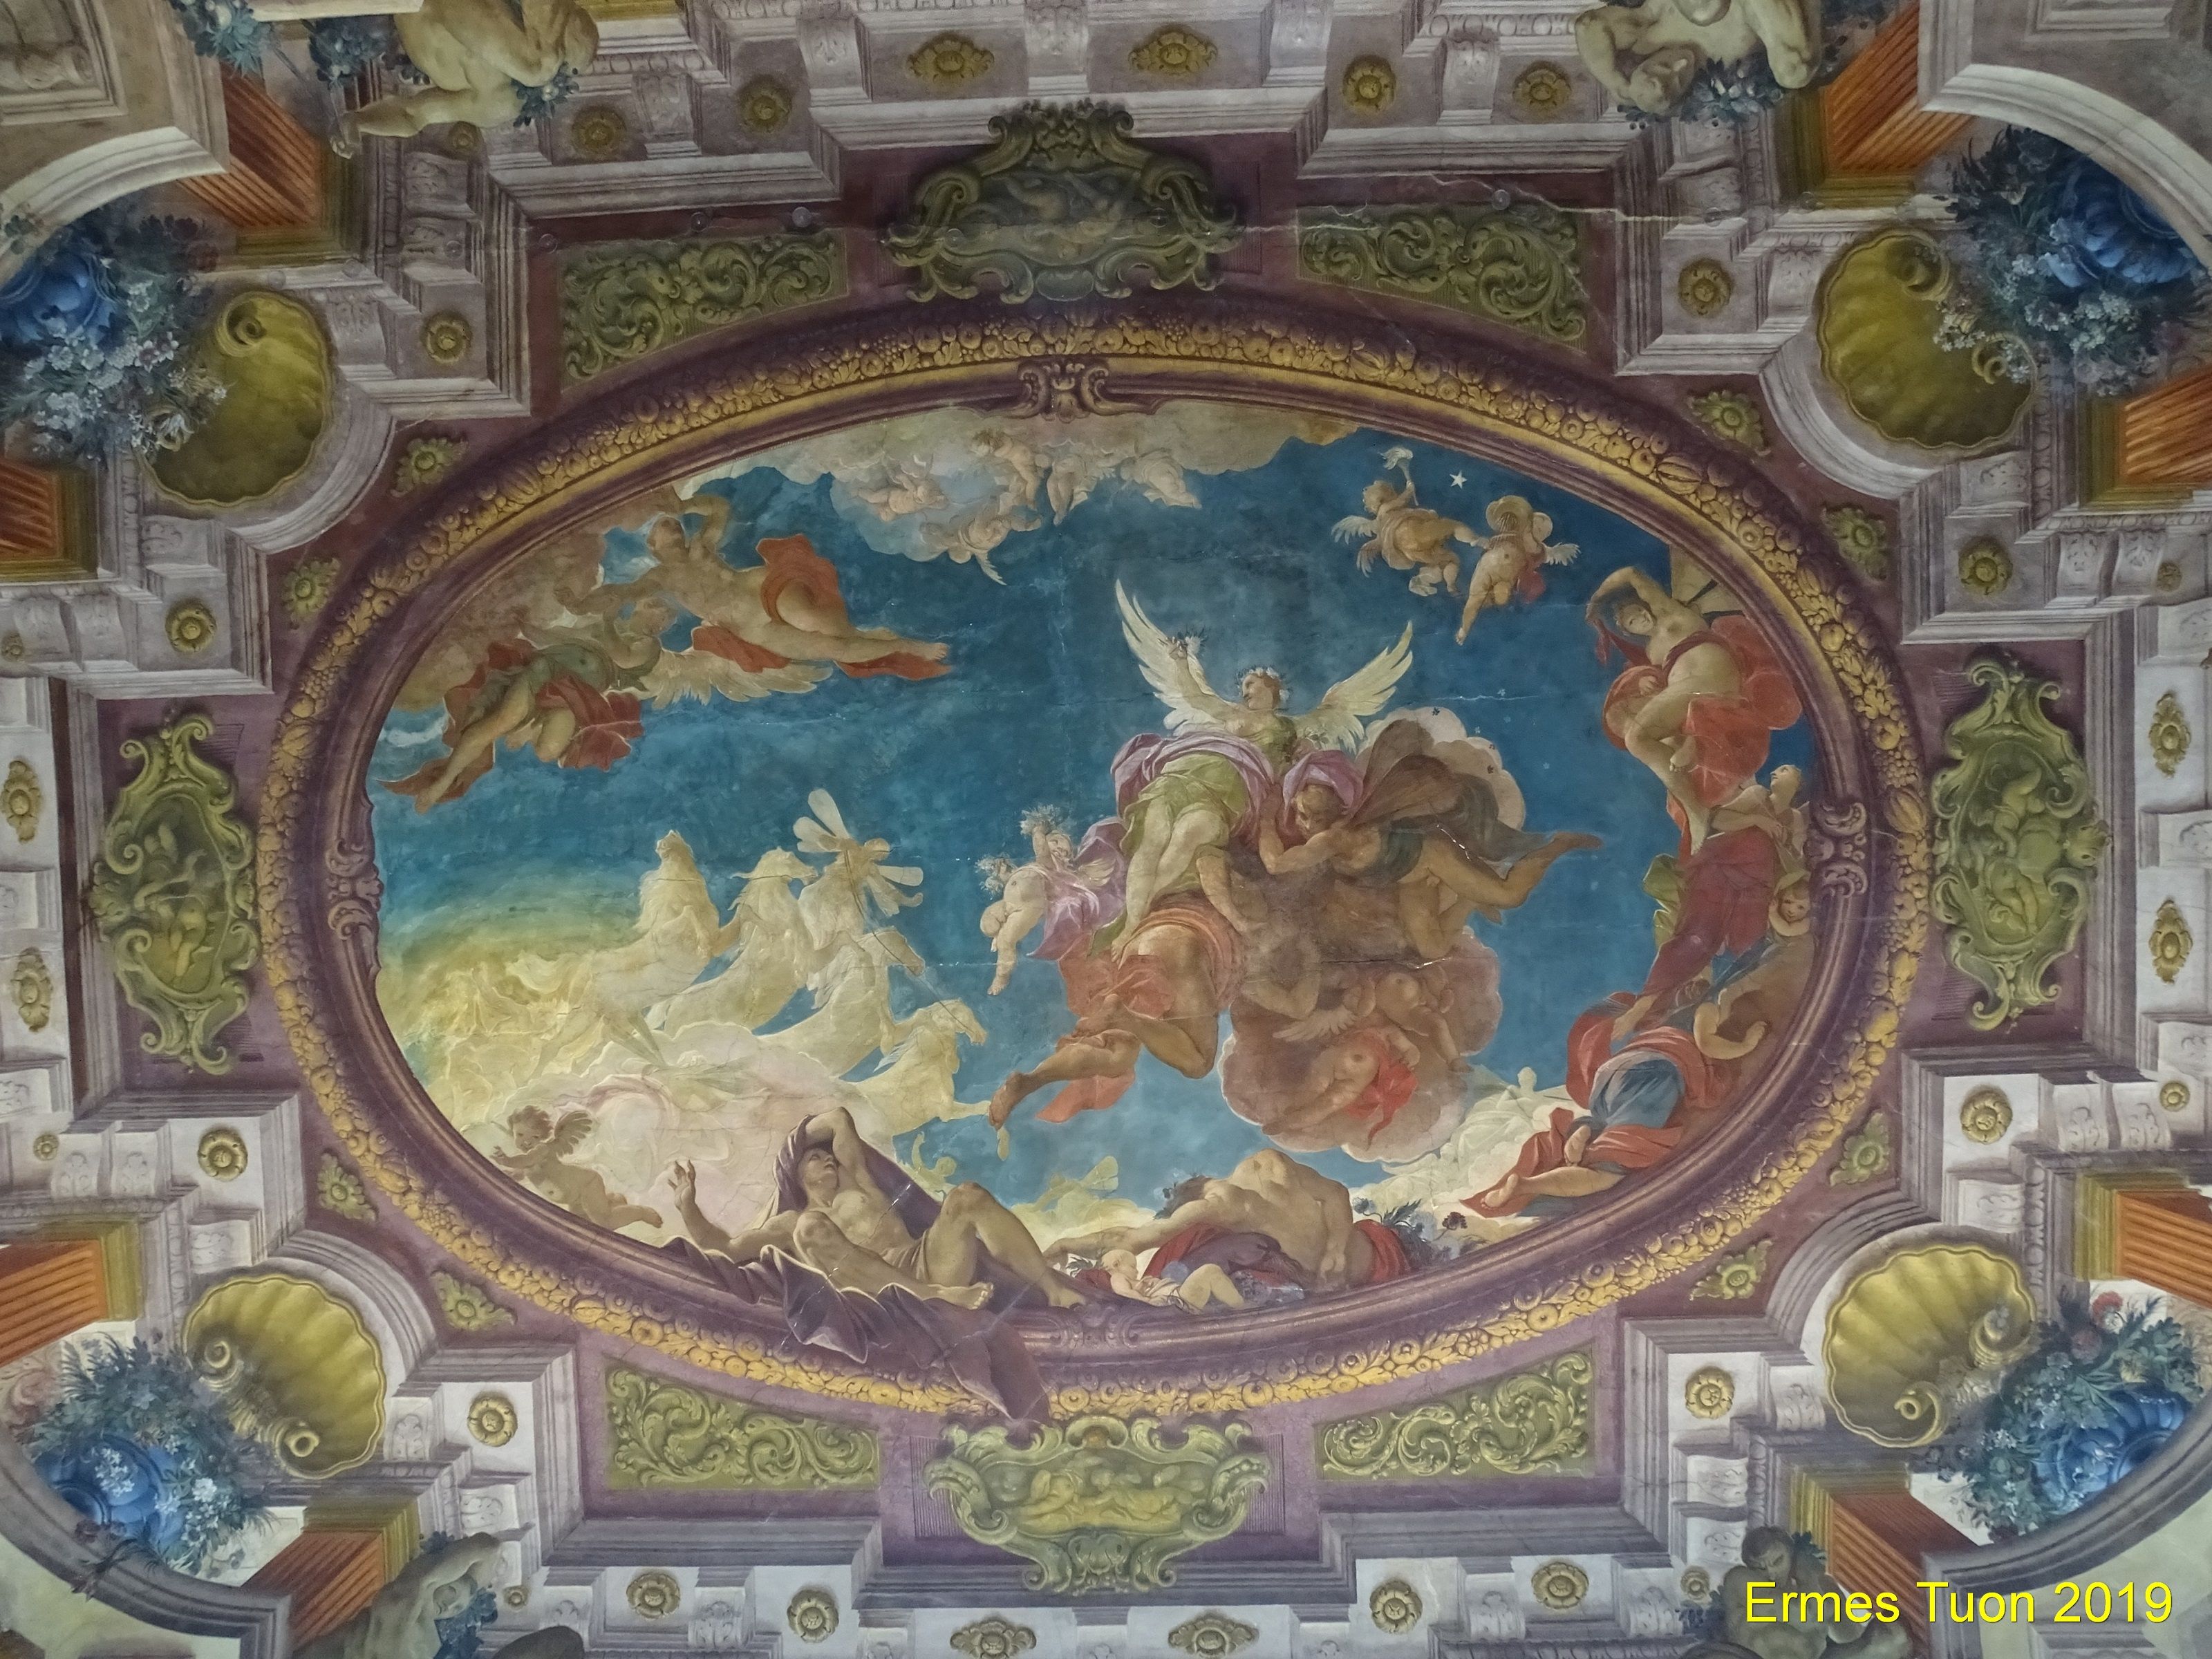 Caption: Ceiling of the hall of mirrors - Palazzo Zenobio - Local guide @ermest